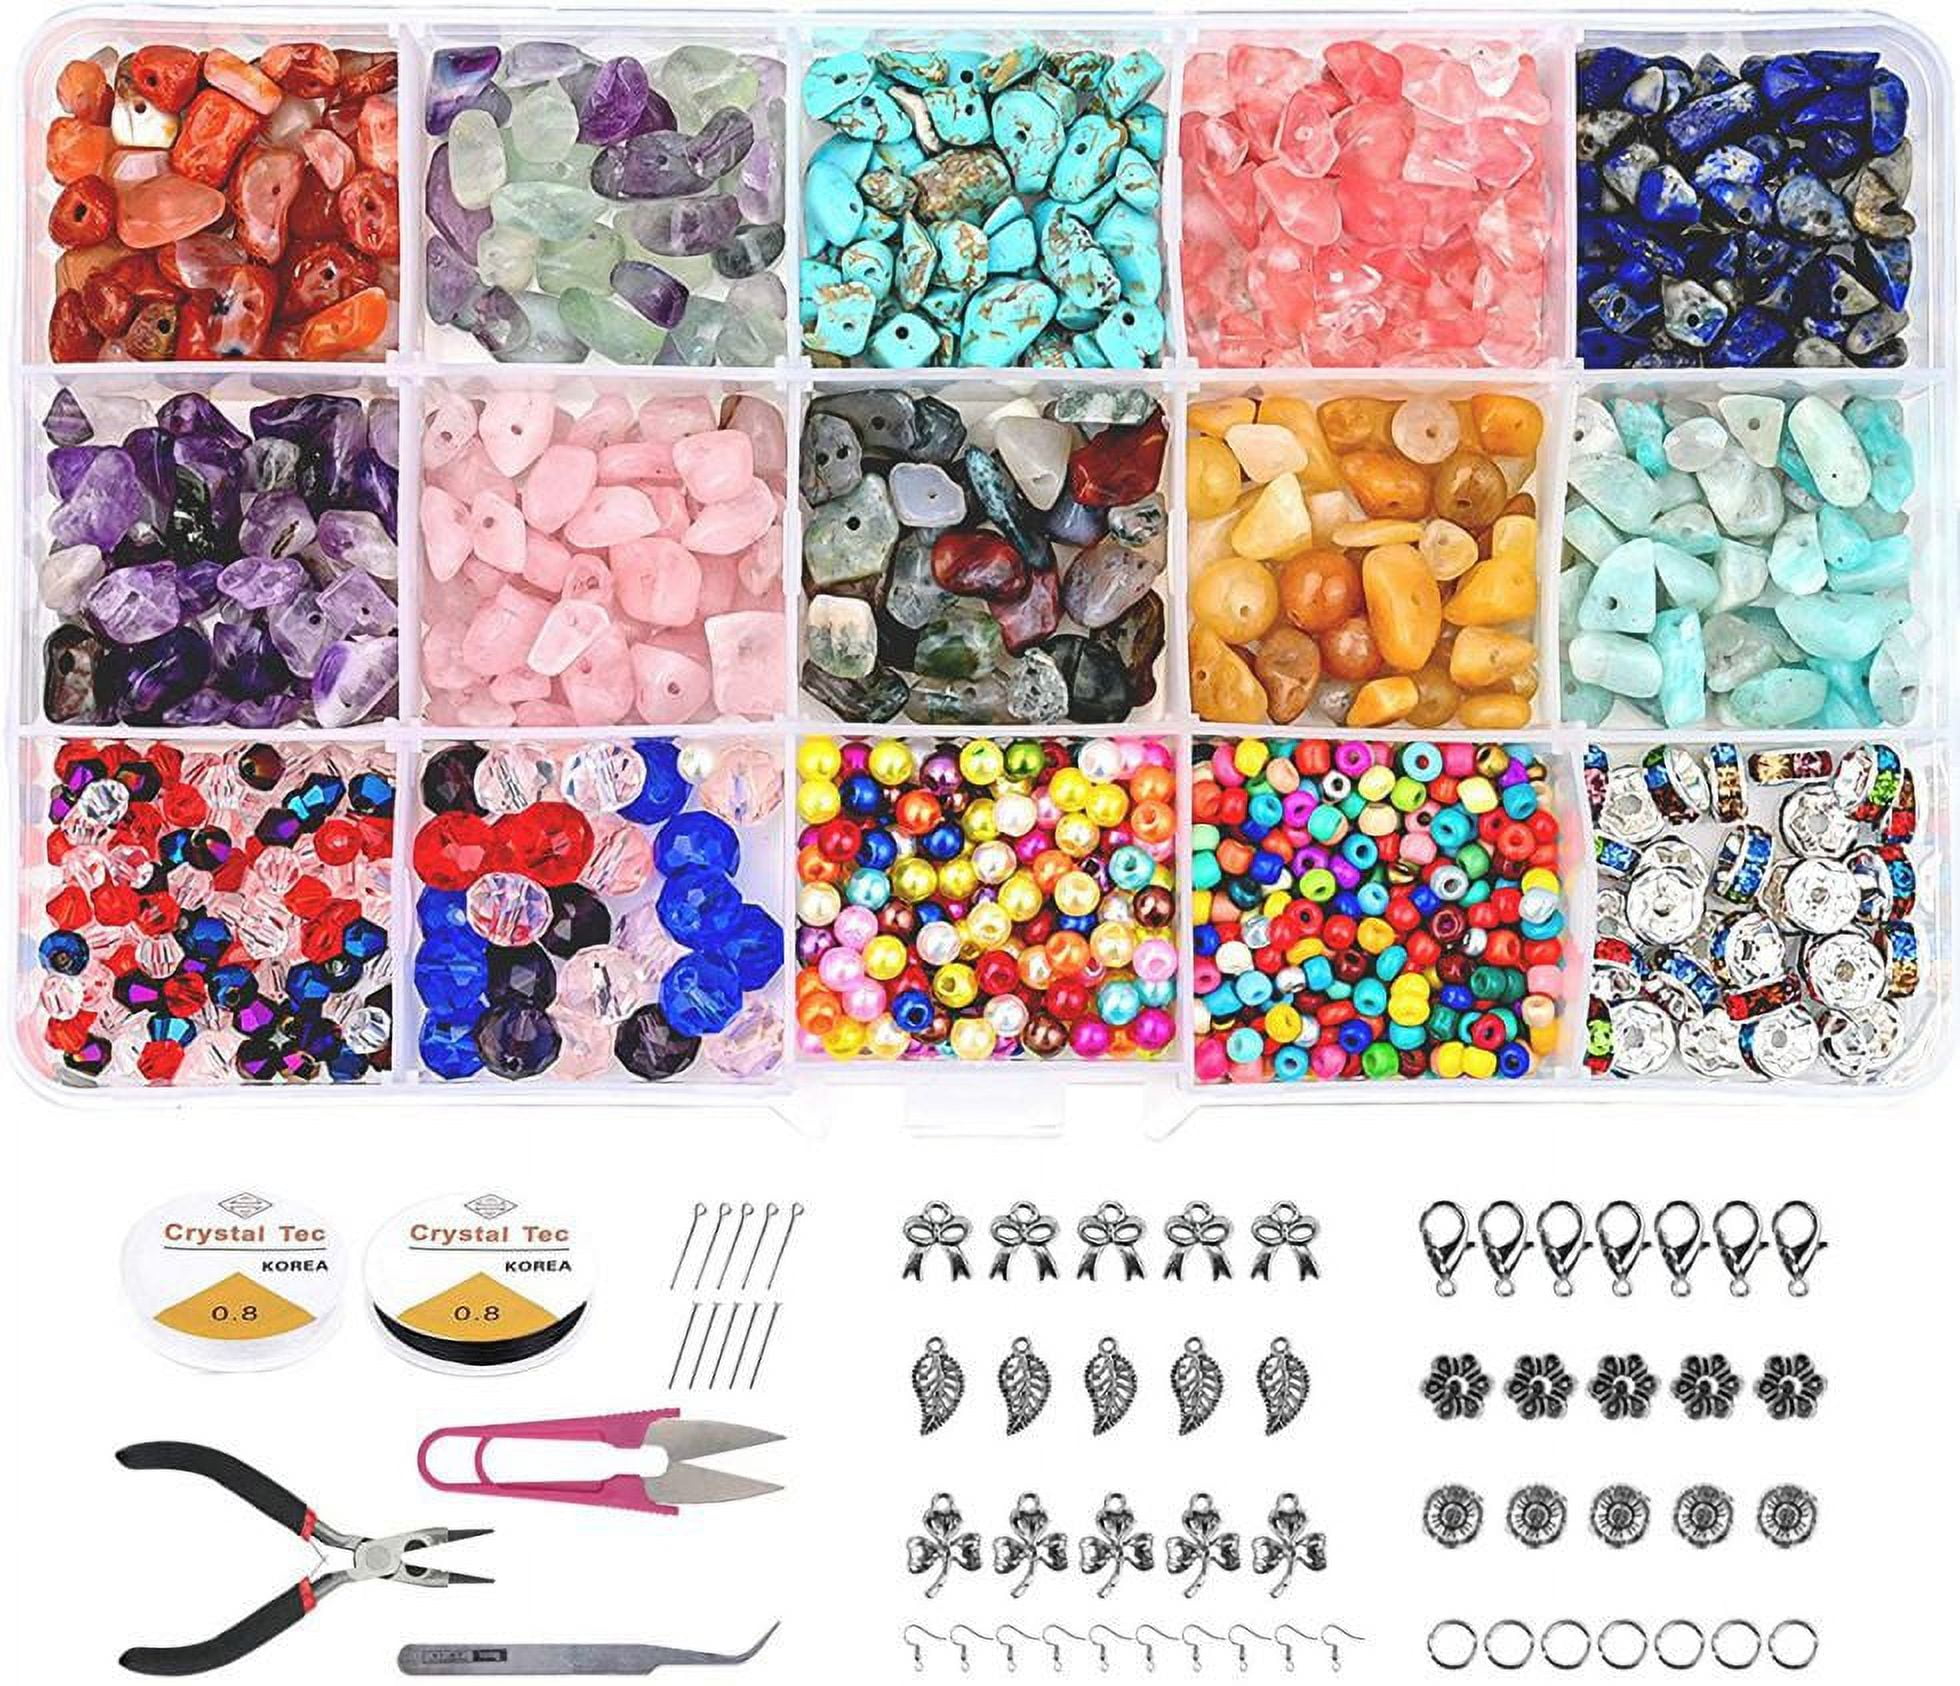 Funtopia Pony Beads for Jewelry Making, 48 Colors Plastic Beads Kit for Friendship Bracelet Making, Polymer Kandi Beads with Letter Beads for Necklace